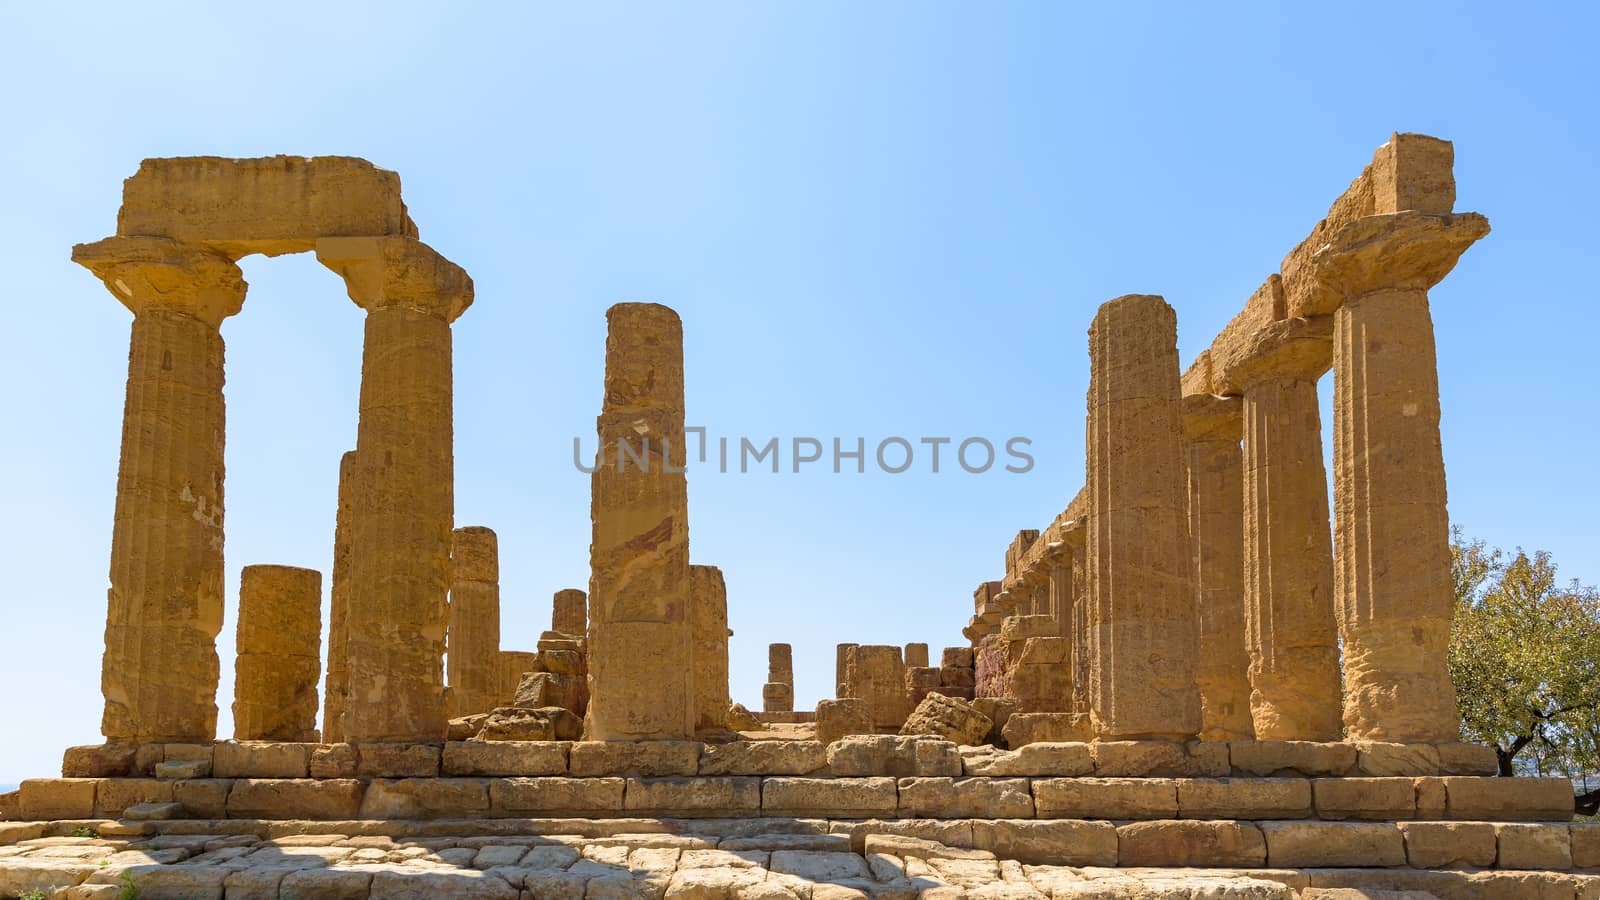 Ruins of the Temple of Juno in the Valley of the Temples in Agrigento, Sicily, Italy